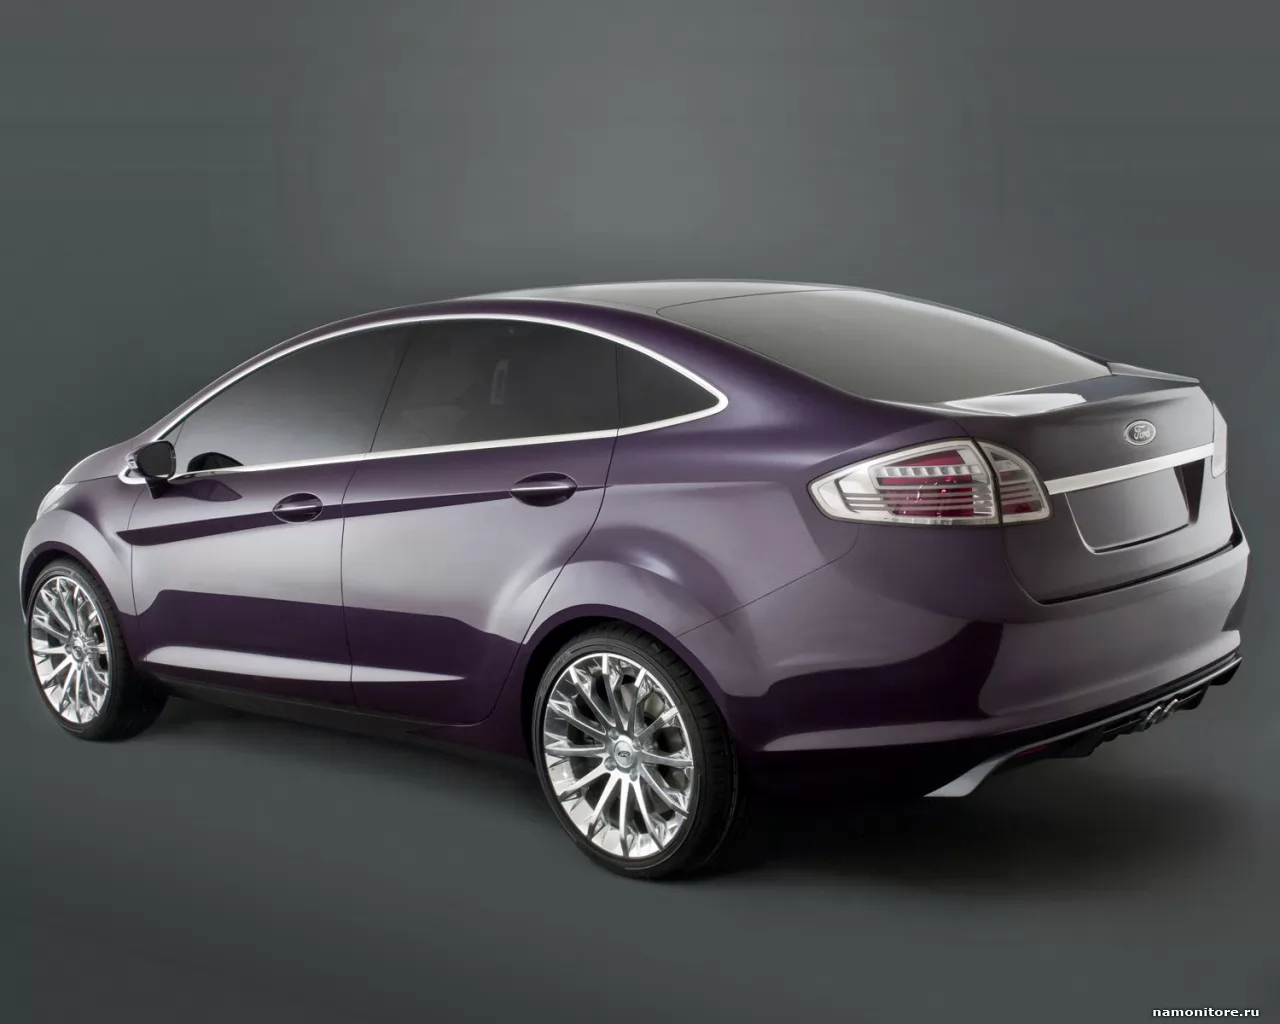 Ford Verve 5-door Concept, Ford, , , ,  